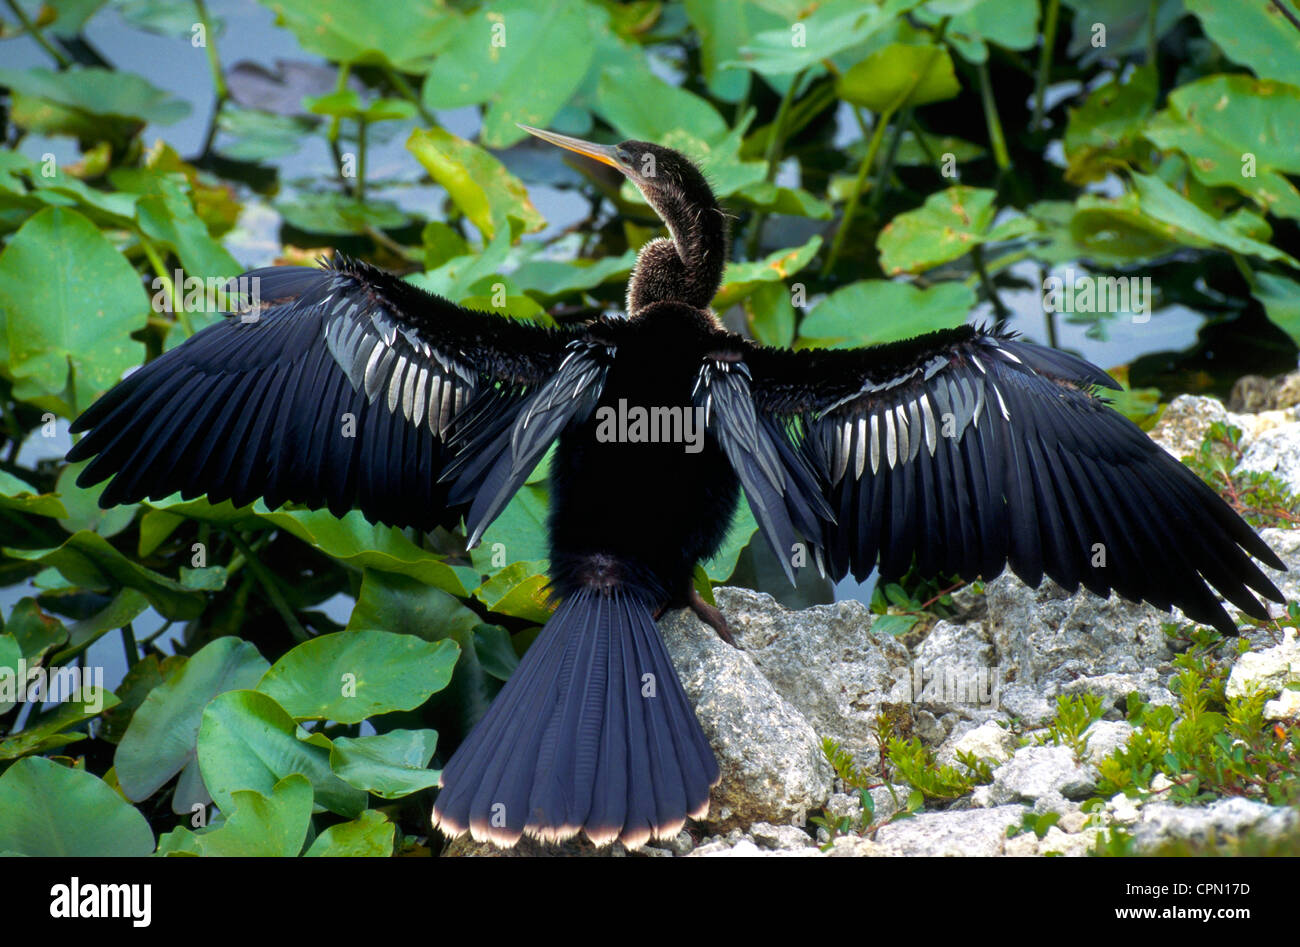 A sleek Anhinga waterbird spreads its black wings and tail to dry its feathers after diving for fish in Everglades National Park in Florida, USA. Stock Photo